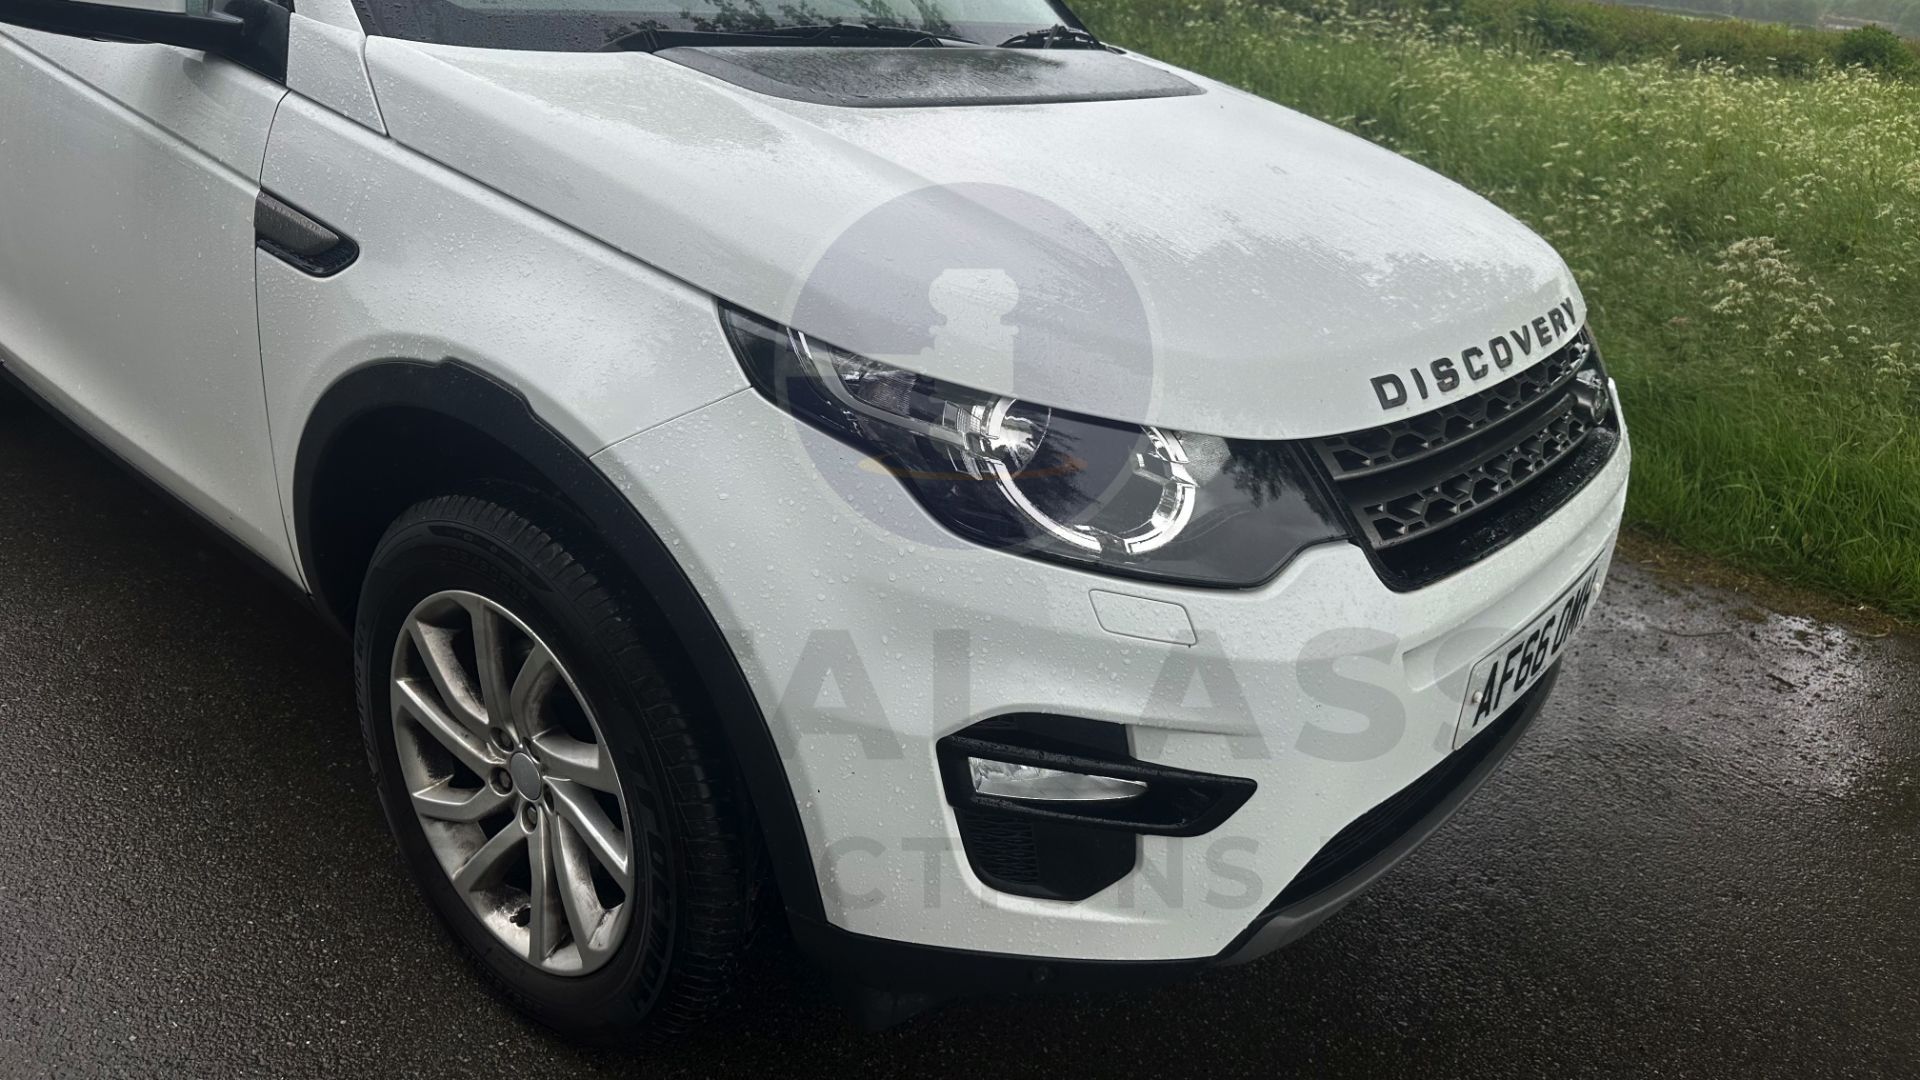 (On Sale) LAND ROVER DISCOVERY SPORT *SE TECH* 7 SEATER (66 REG - EURO 6) 2.0 TD4 - AUTO *HUGE SPEC* - Image 15 of 48